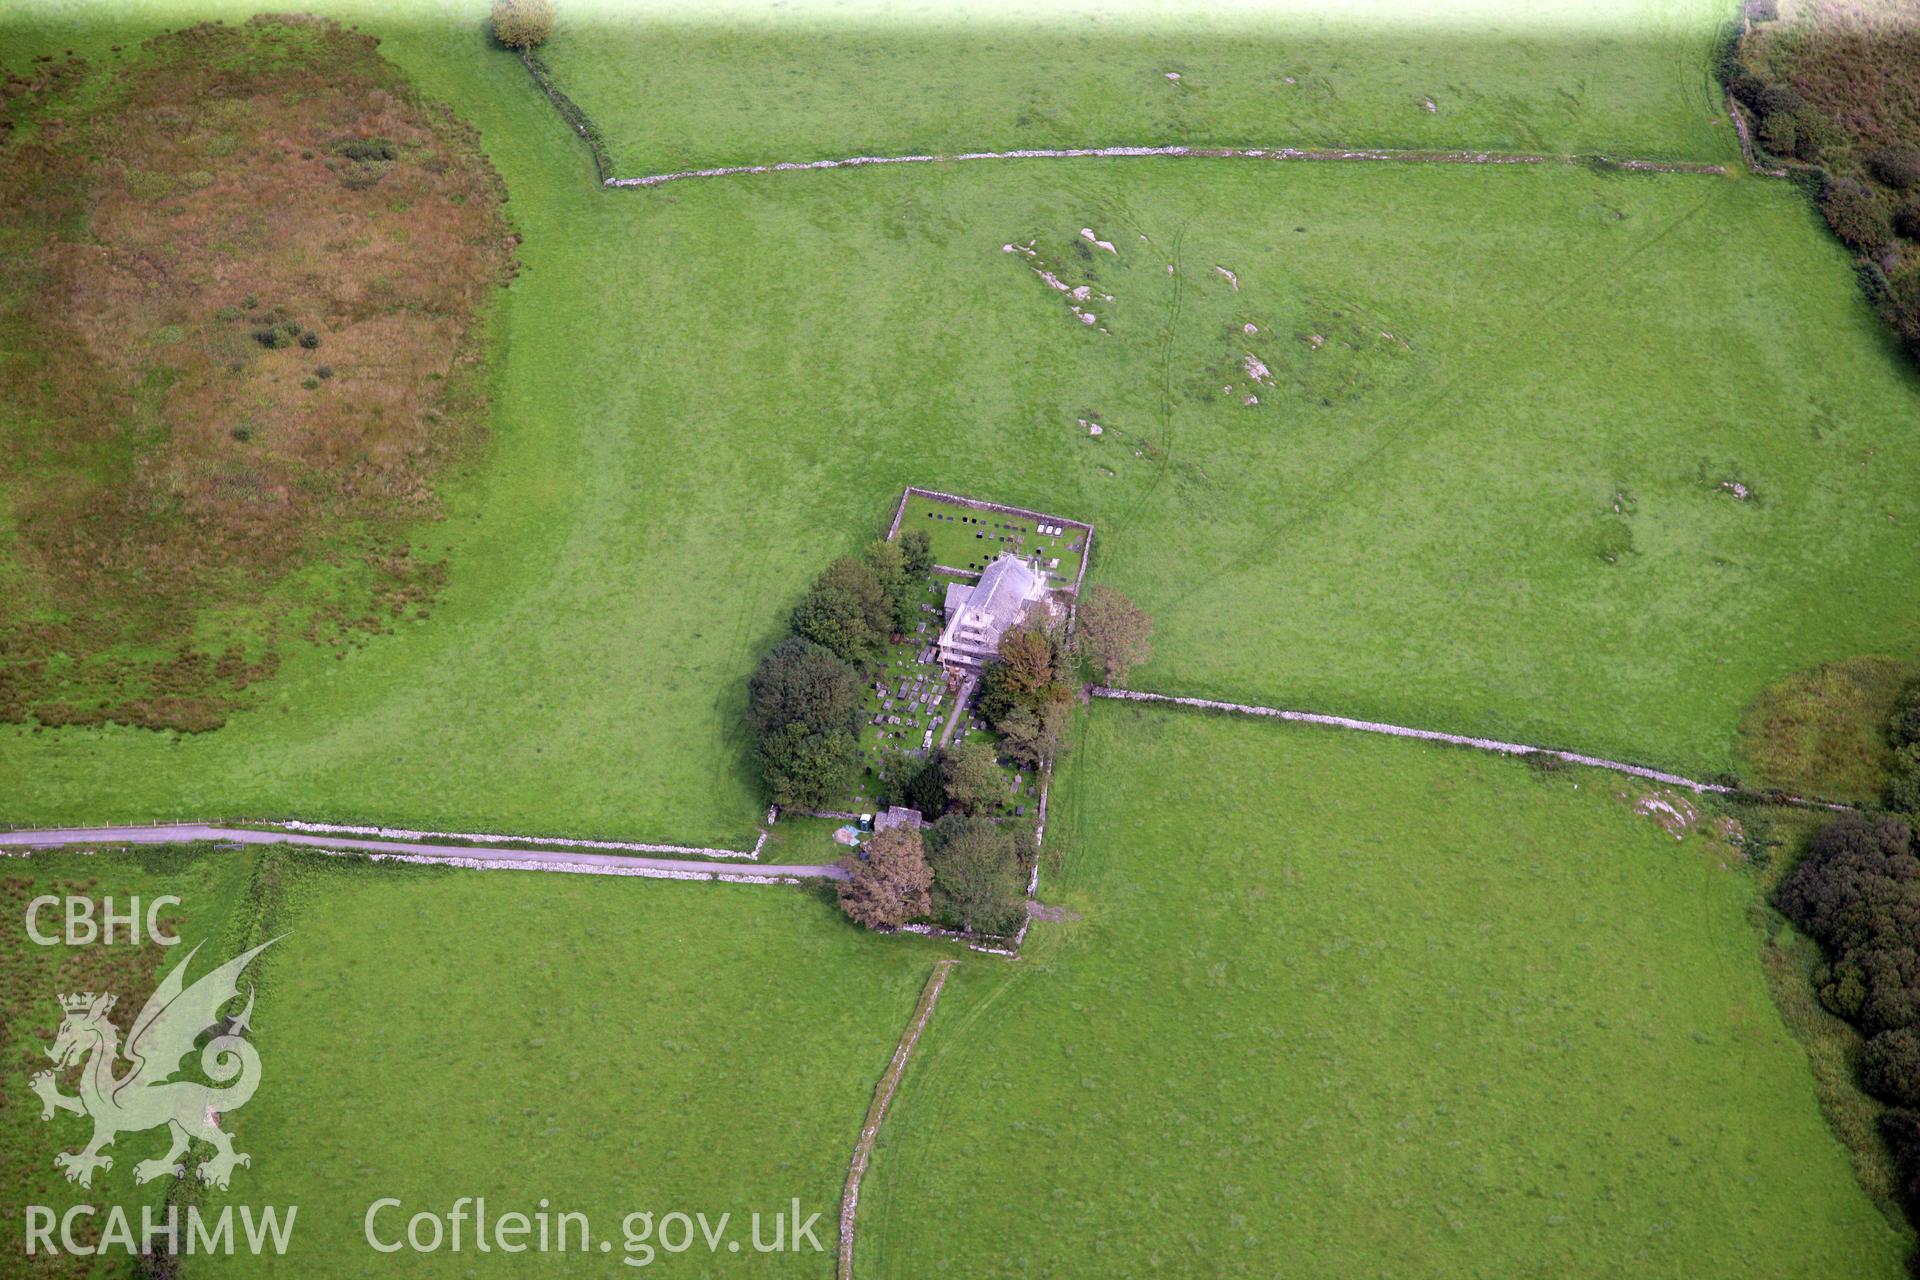 RCAHMW colour oblique photograph of St Cynhaiarn's Church, north-east of Criccieth. Taken by Toby Driver on 17/08/2011.